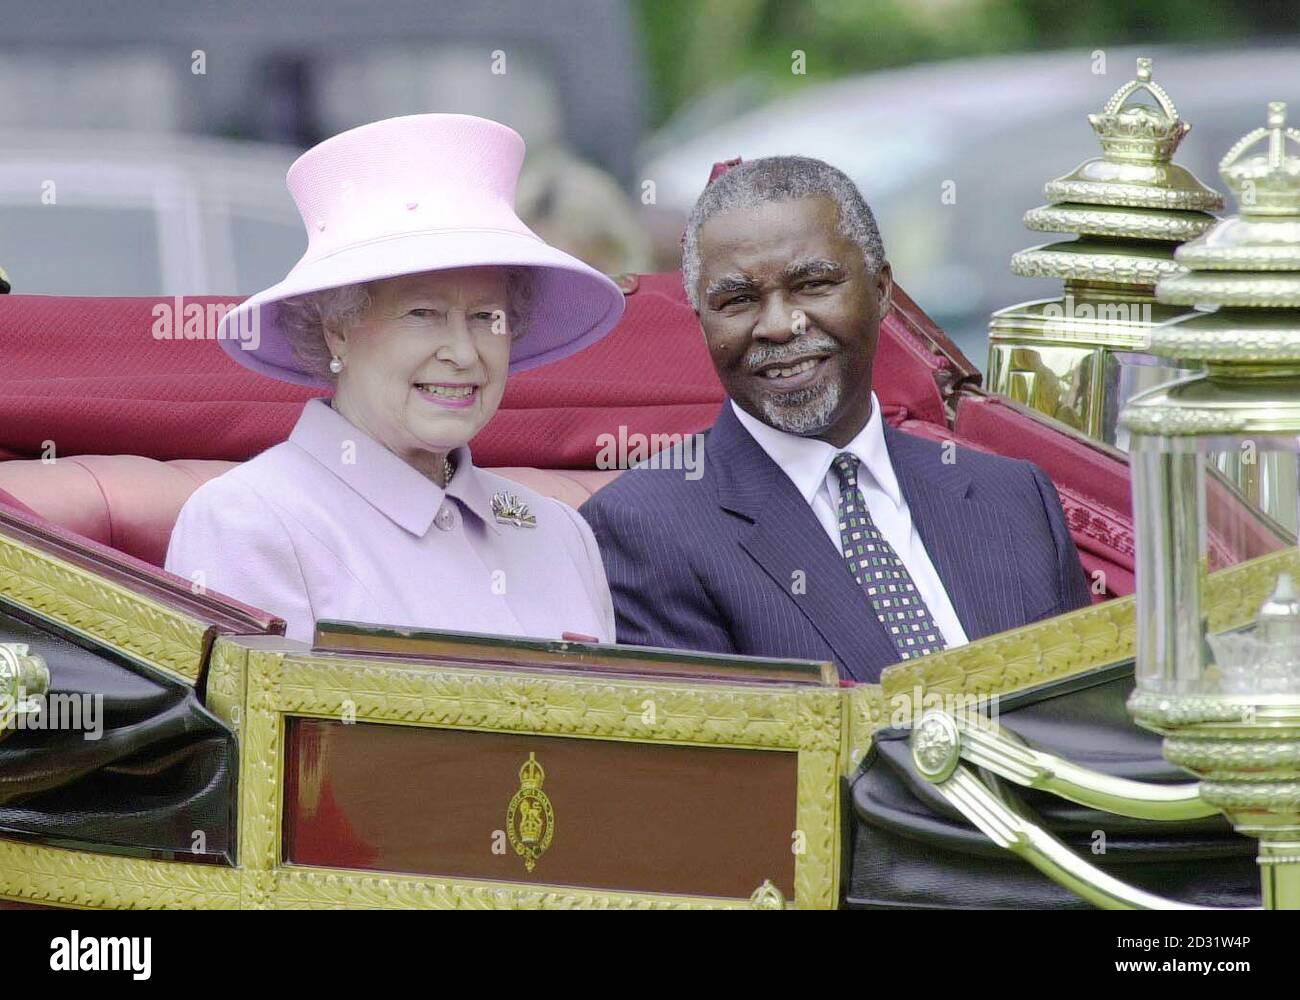 The Queen welcomed President Thabo Mbeki to Windsor at the start of the South African leader's state visit to Britain. The Queen and the President rode in an opened top carriage from Home Park to Windsor. The President arrived in Britain for a three day State visit.  Stock Photo